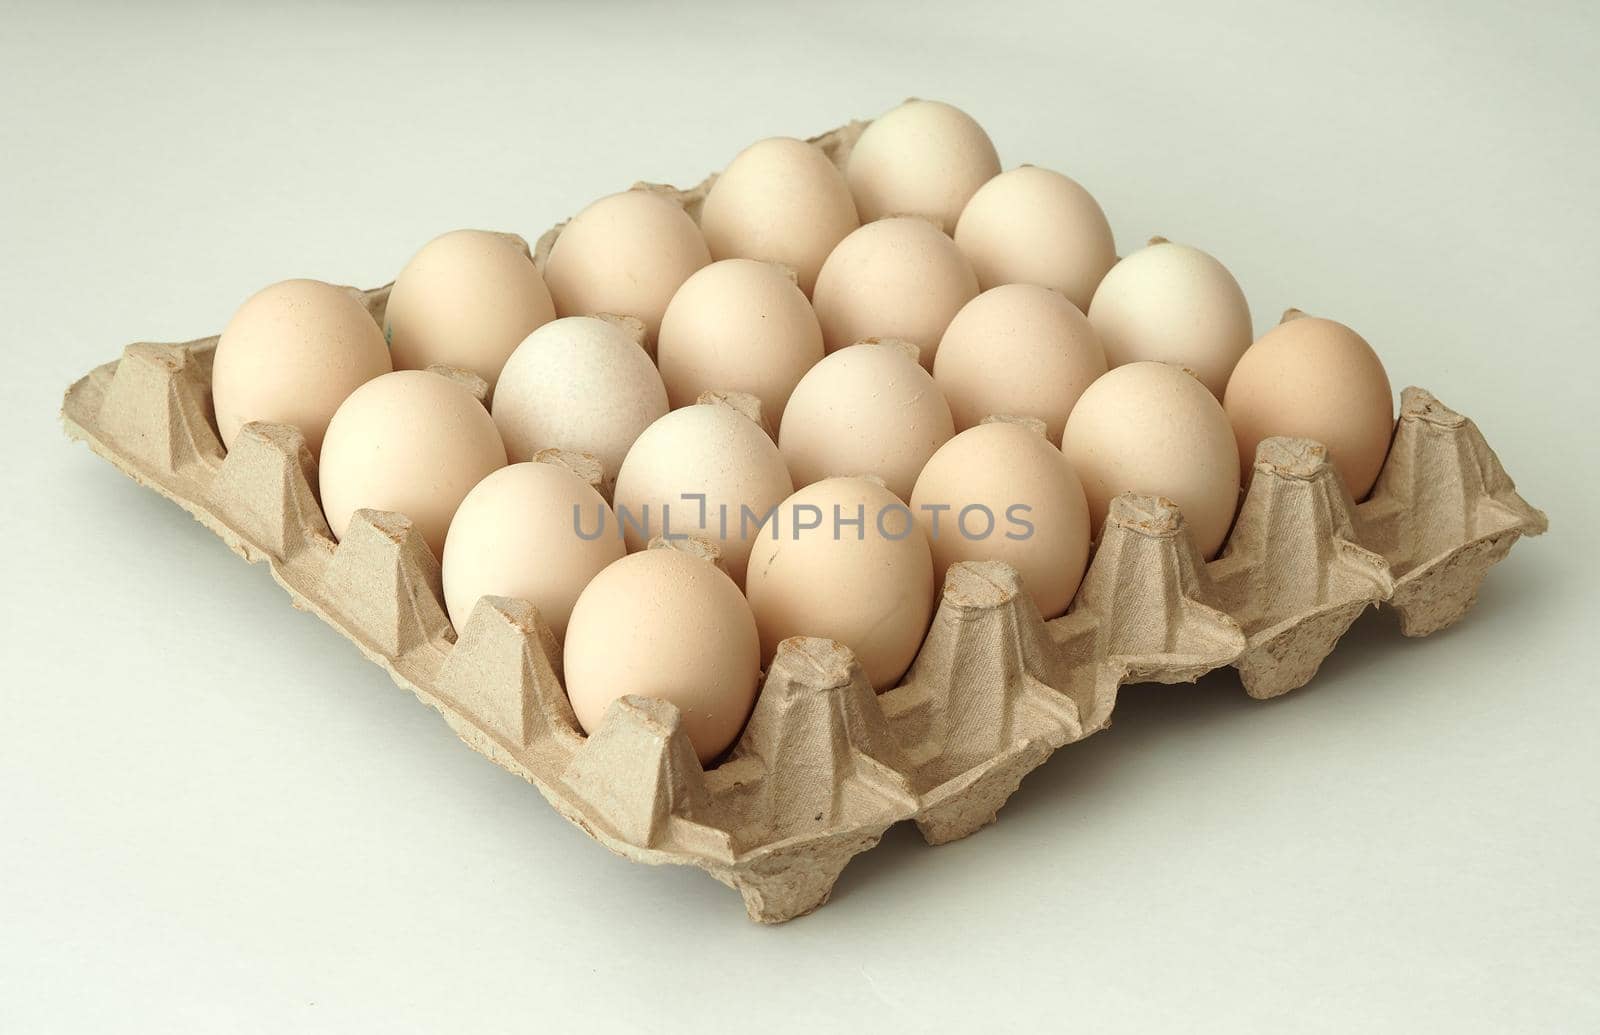 chicken eggs in a packachicken eggs in a package home village, large in an egg boxge homemade rustic. High quality photo